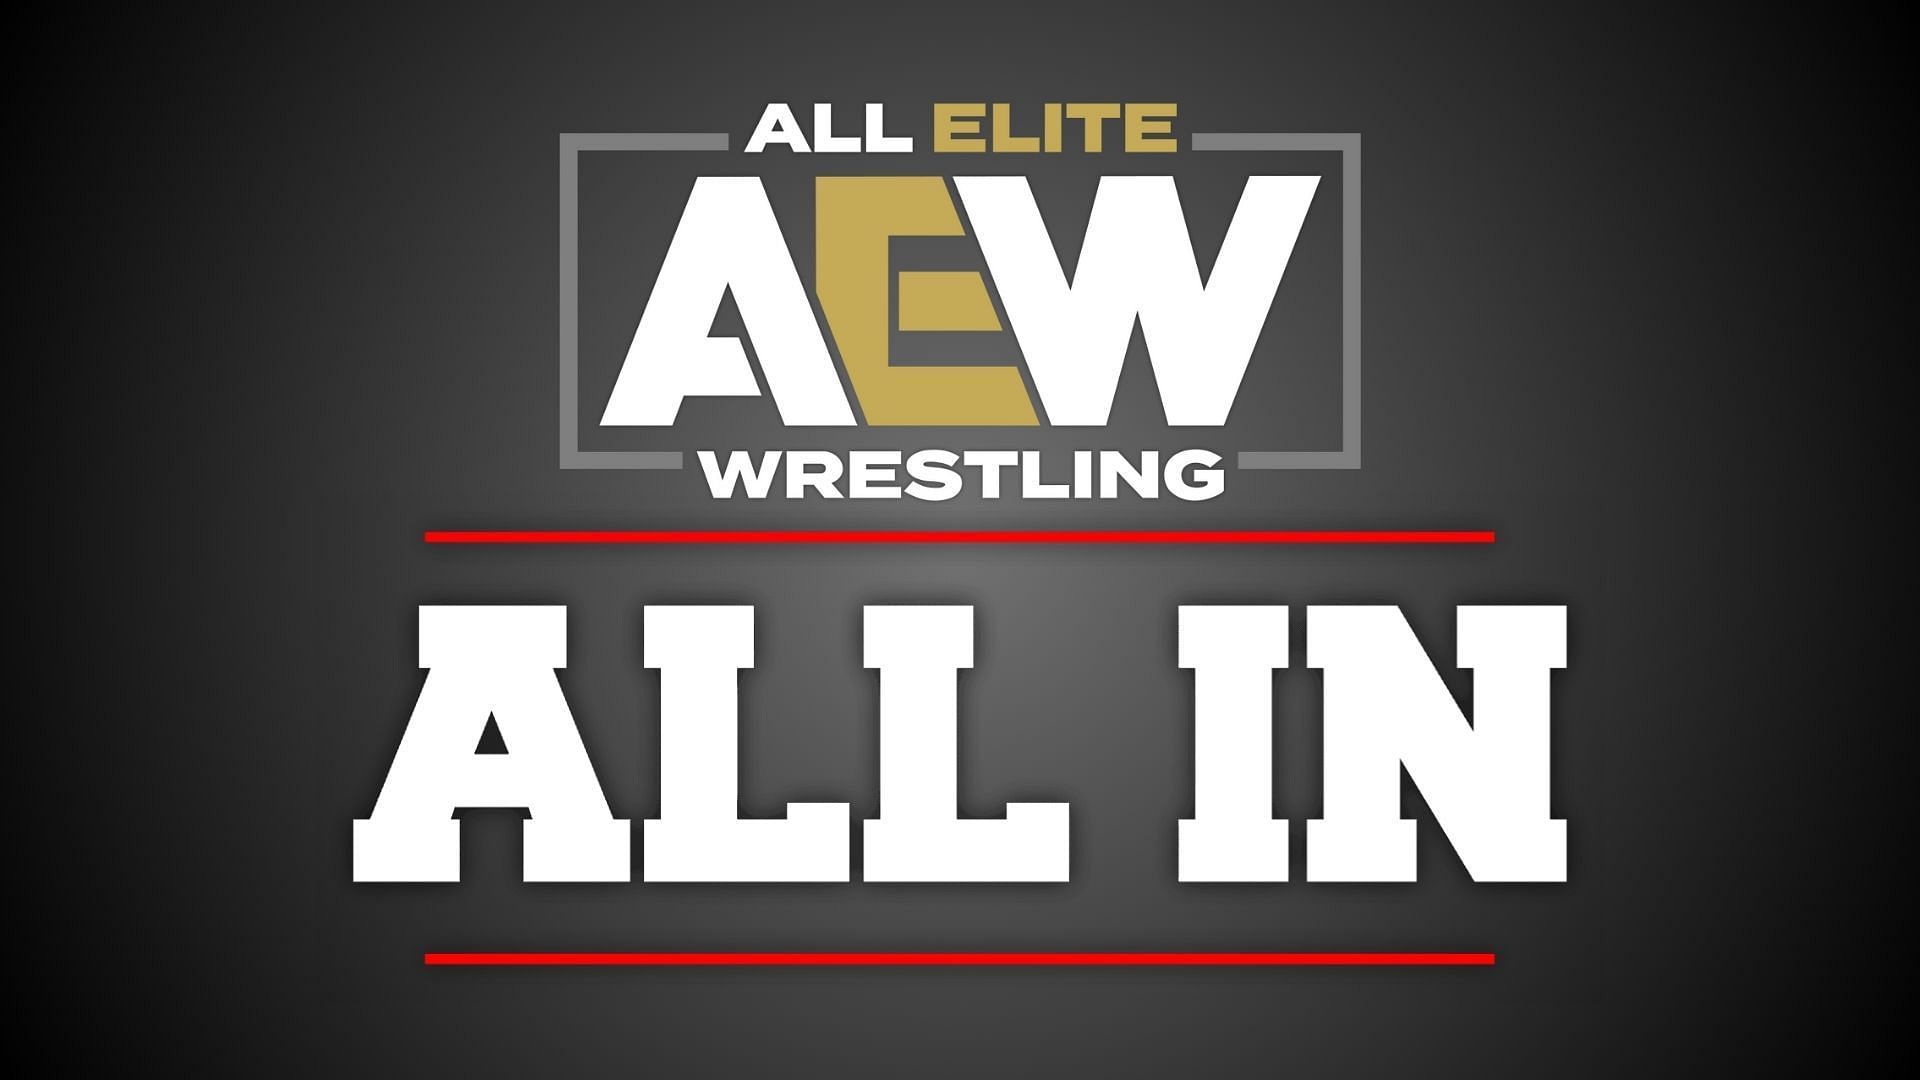 AEW All In takes place in London, England this month.